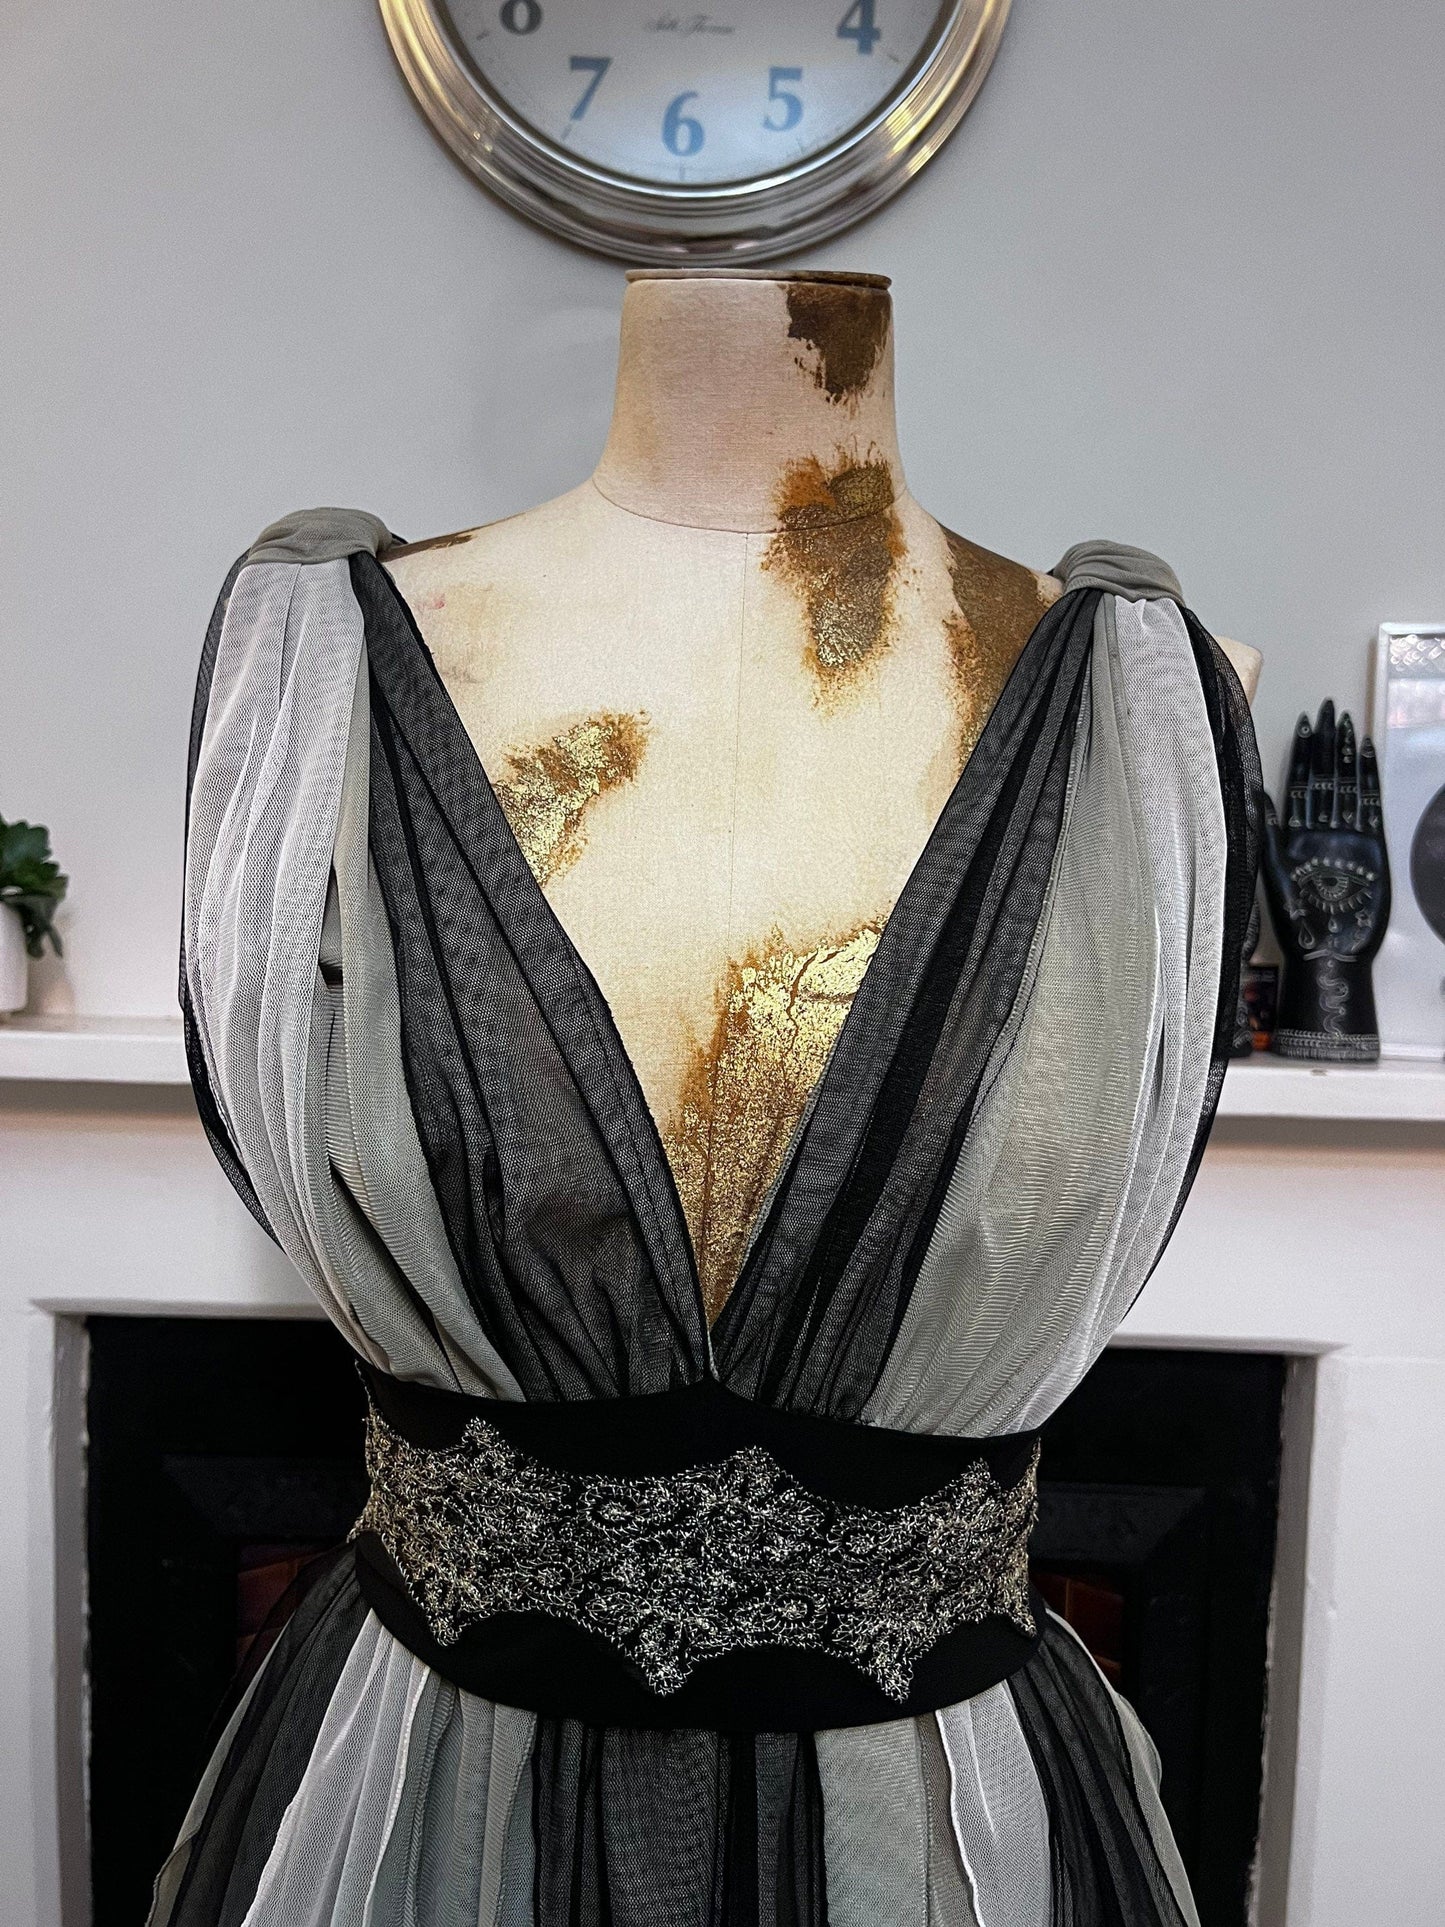 Vintage Greys & Black Deep V Party Evening Top Fine Mesh Multi Layered Fabrics with waistband detail - EUR38